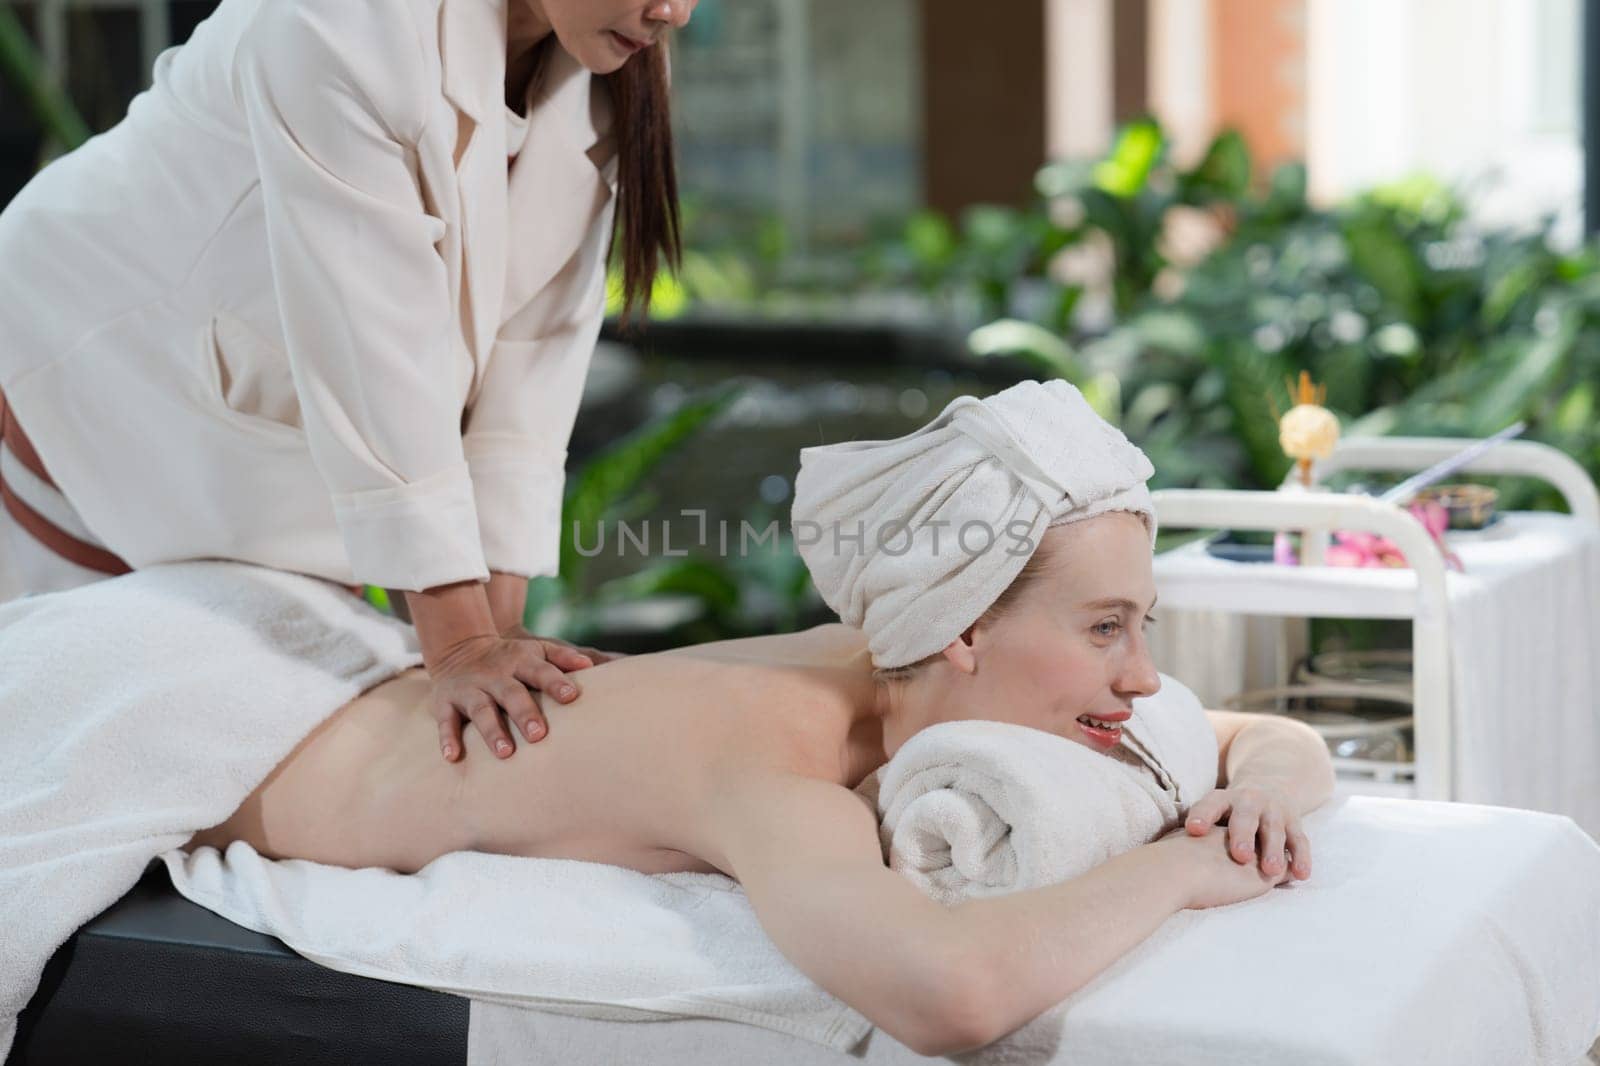 Beautiful young woman received a back massage on a spa bed from masseuse. Attractive female relaxes deeply by skilled hands of the massage therapist. Surrounded with nature. Side view. Tranquility.